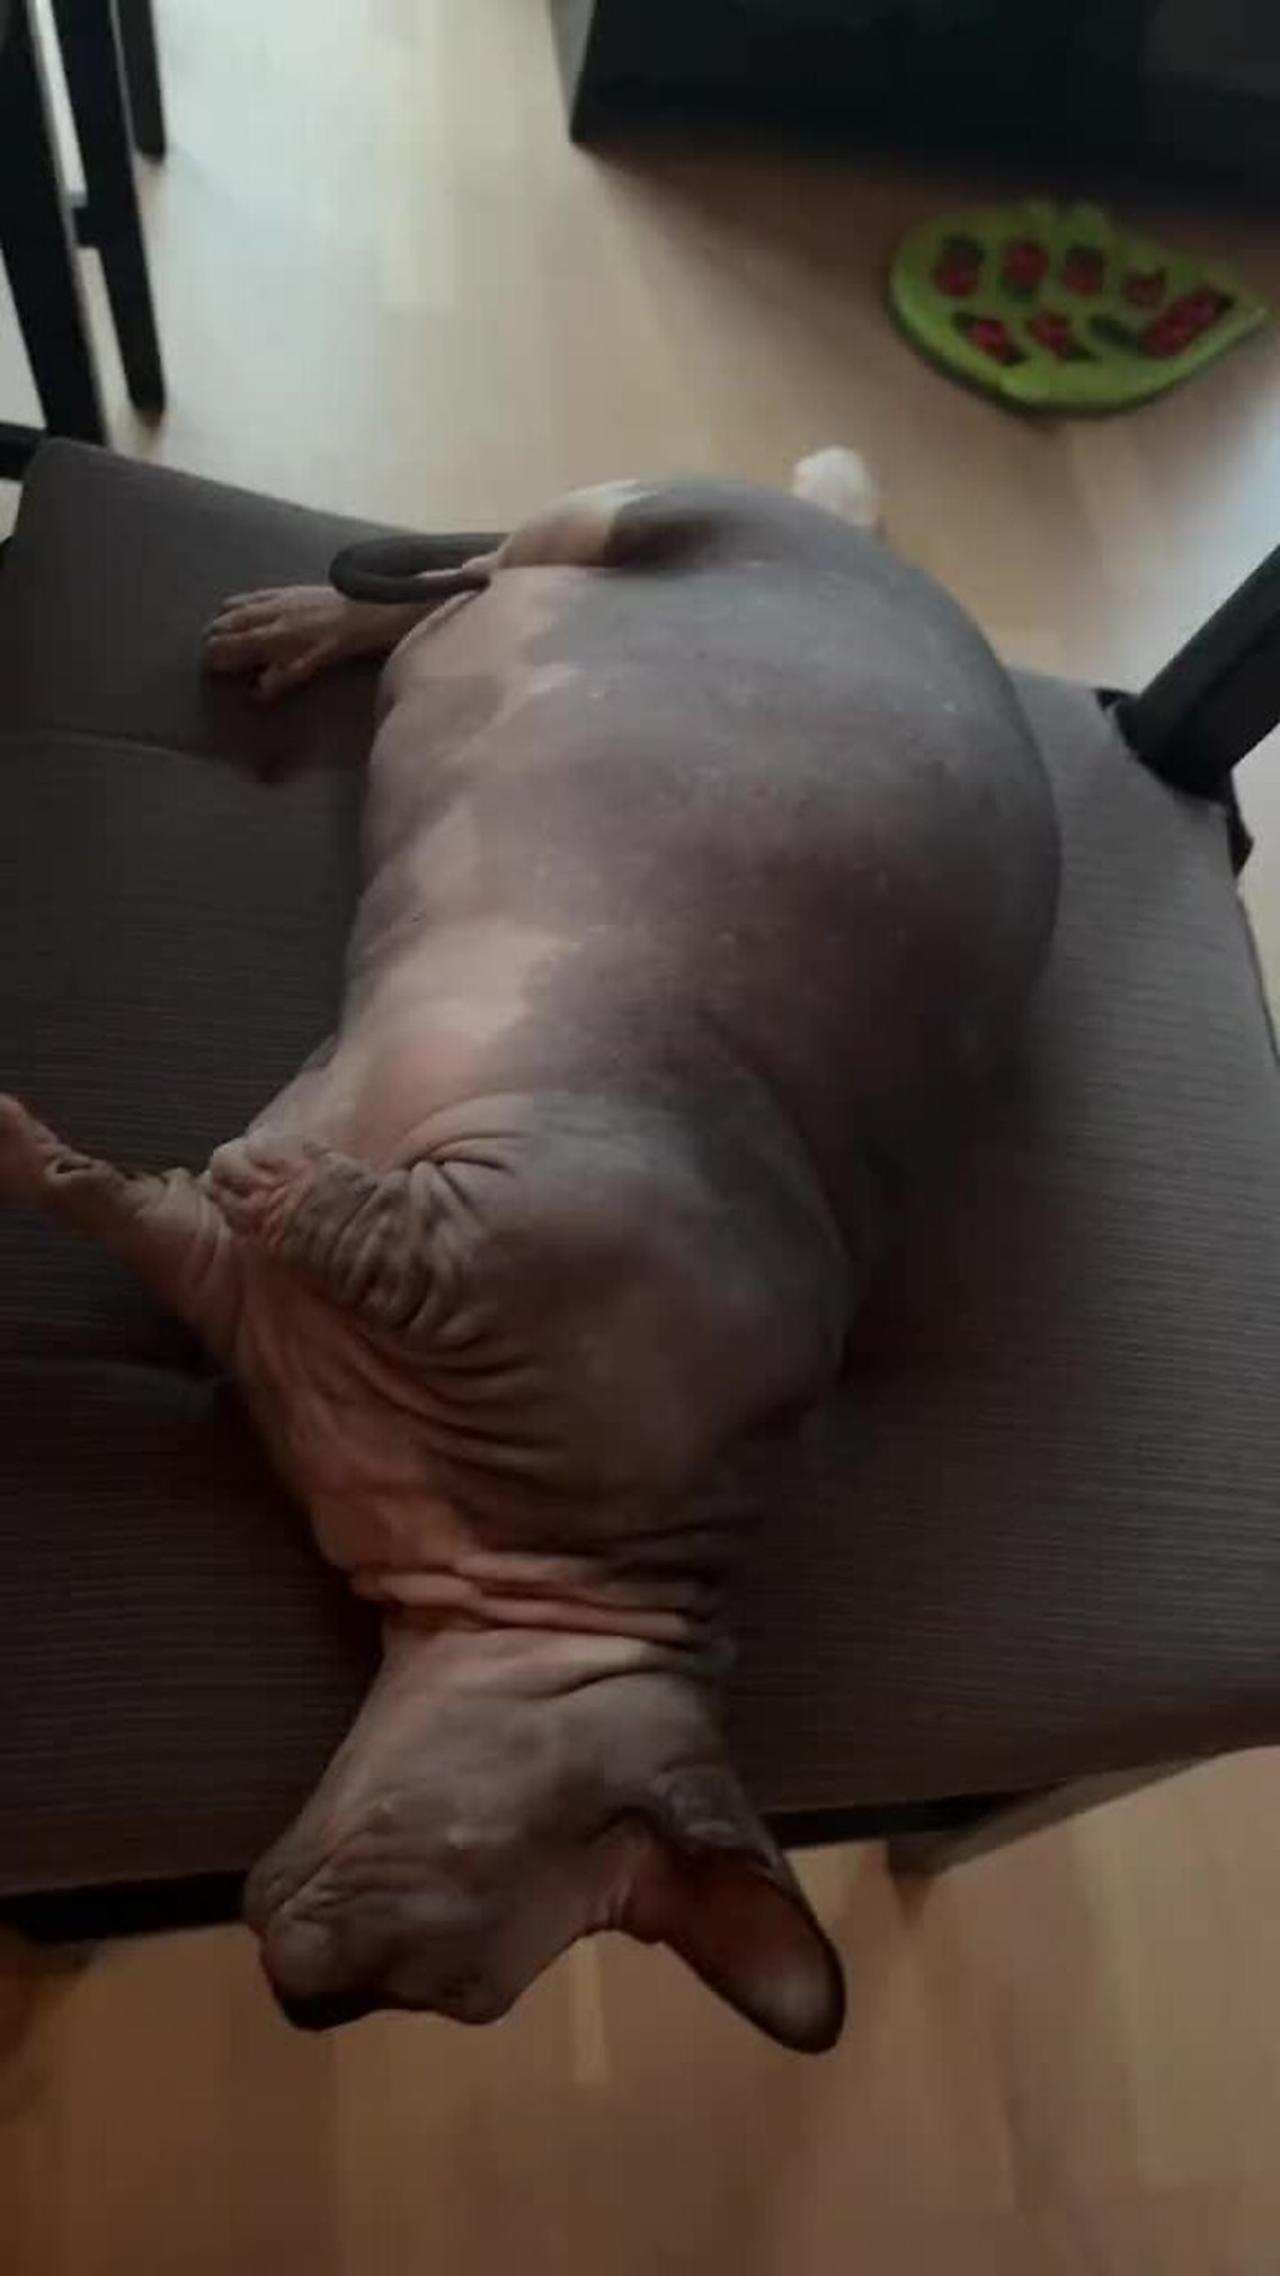 Sphynx cat loves getting belly pats!.mp4